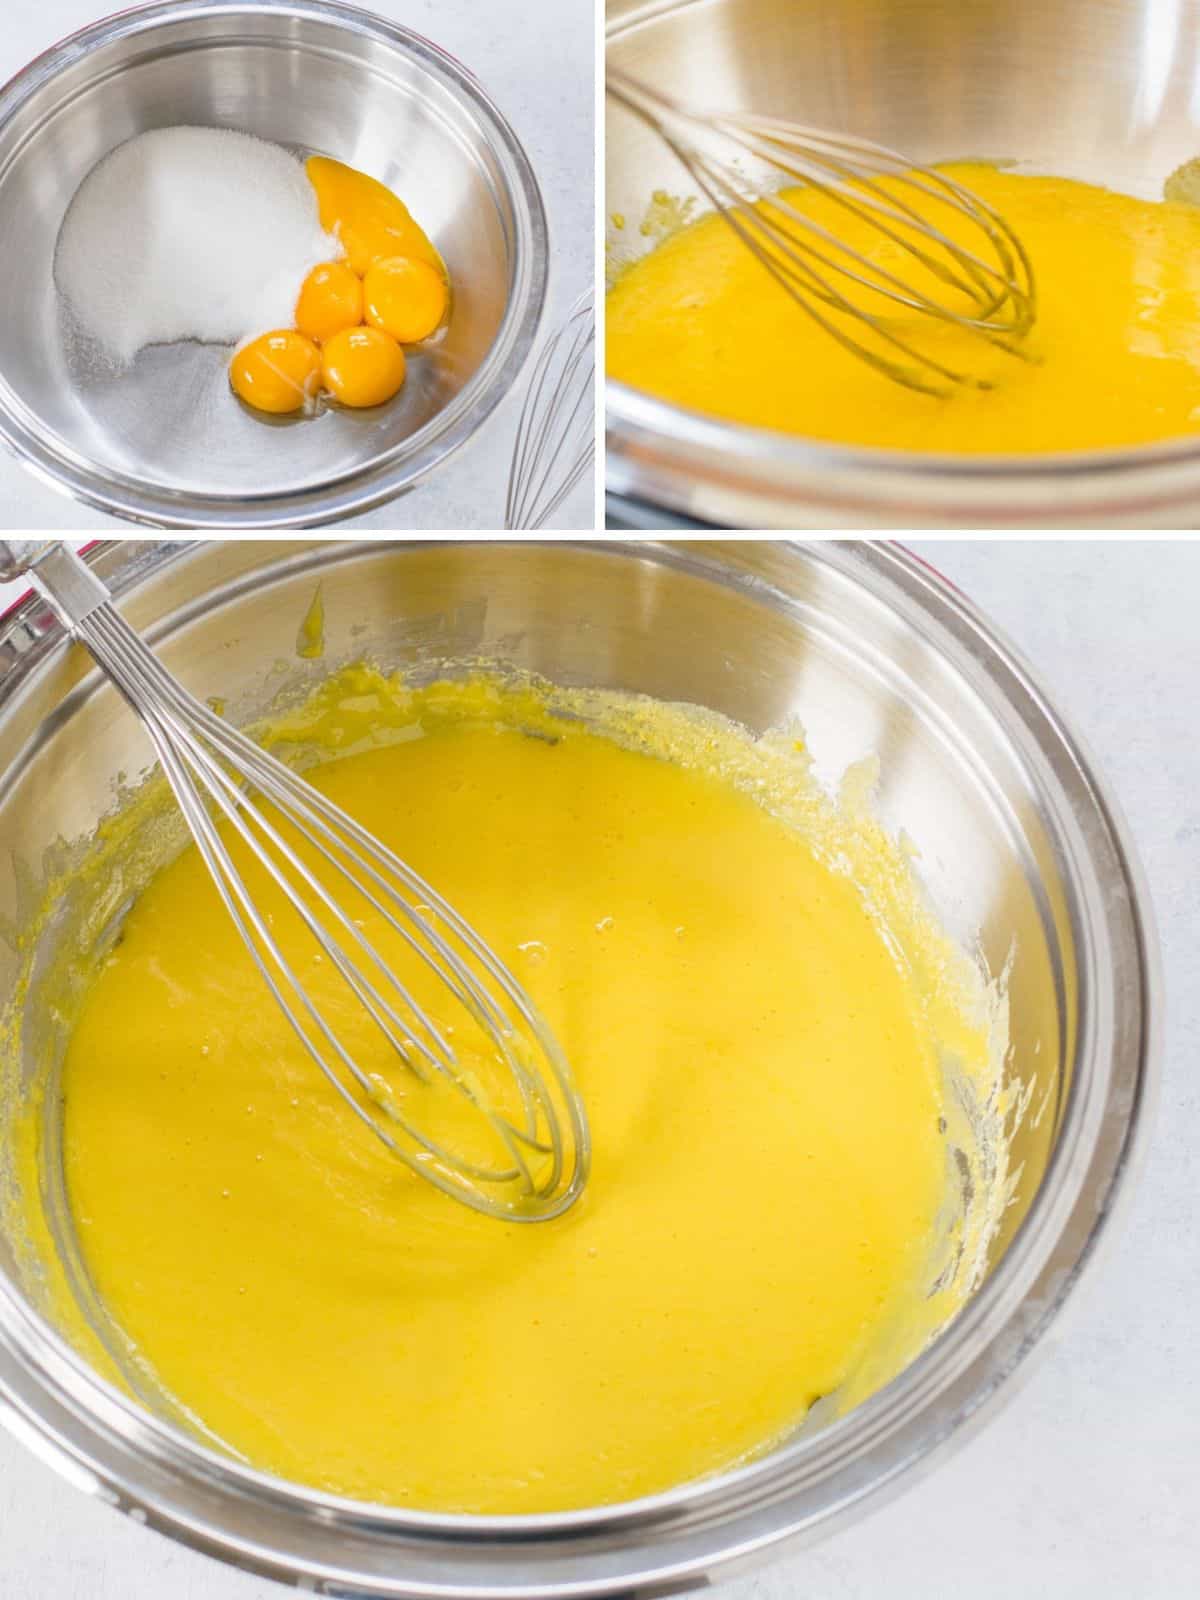 egg yolks and sugar in bowl, whisking yolks, bowl of yellow mixture with whisk